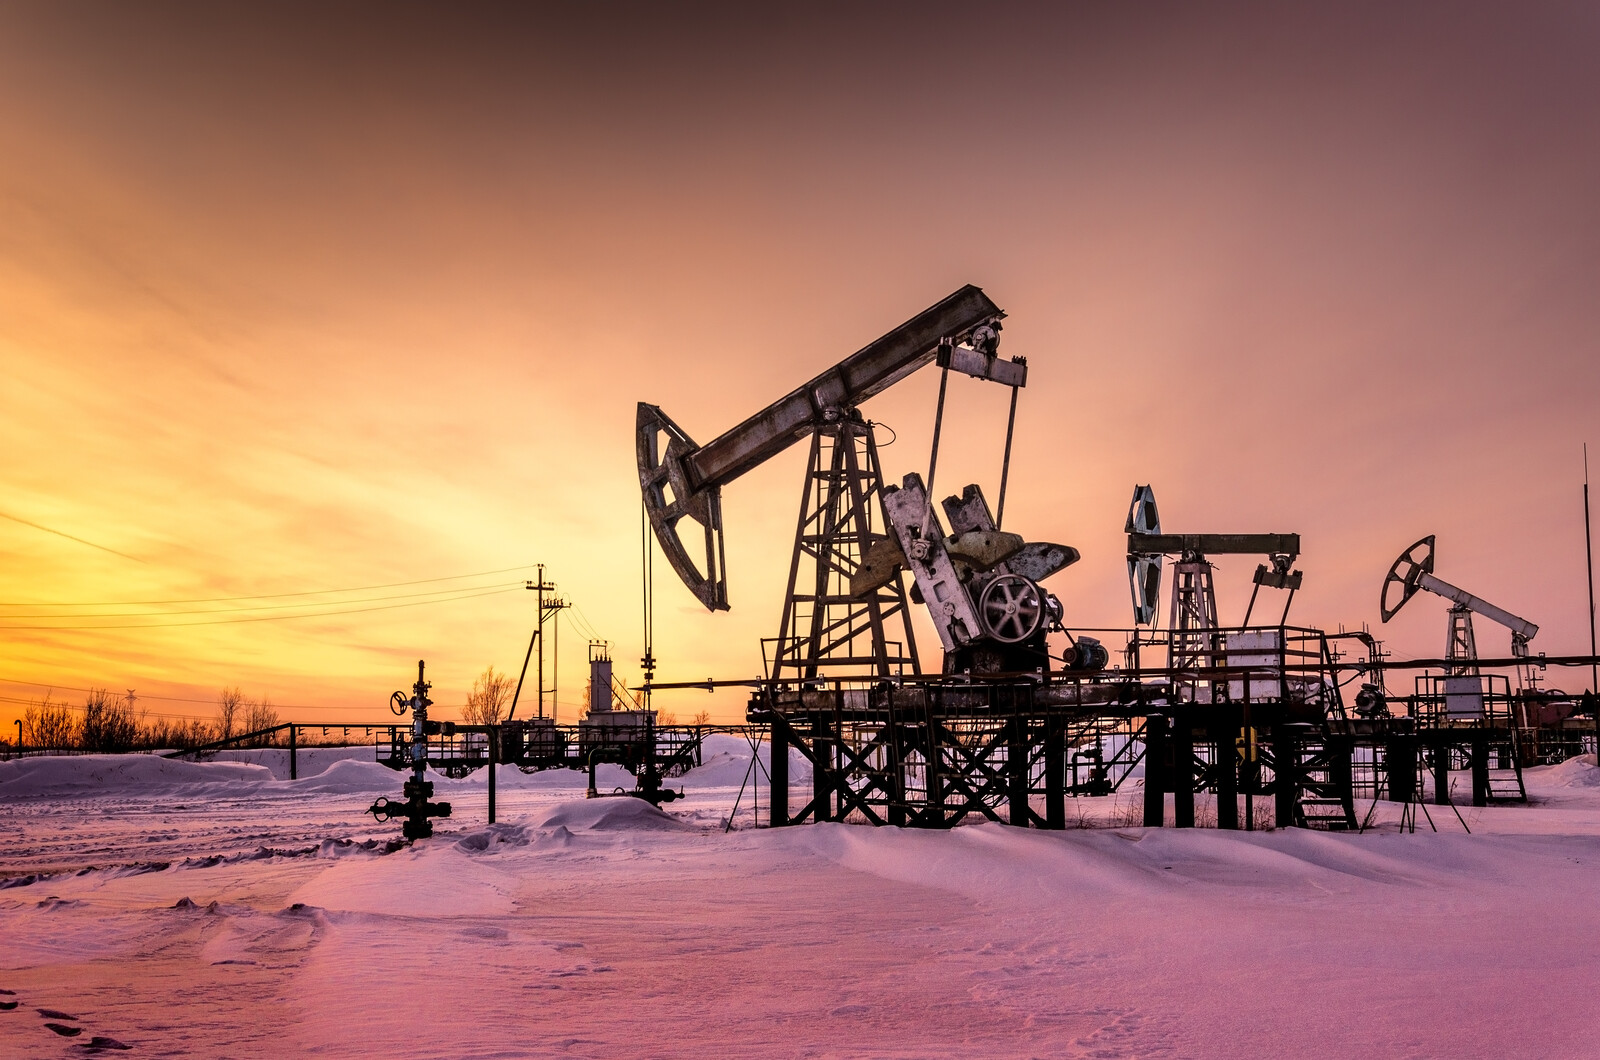 A pumpjack seen in winter during sunset.